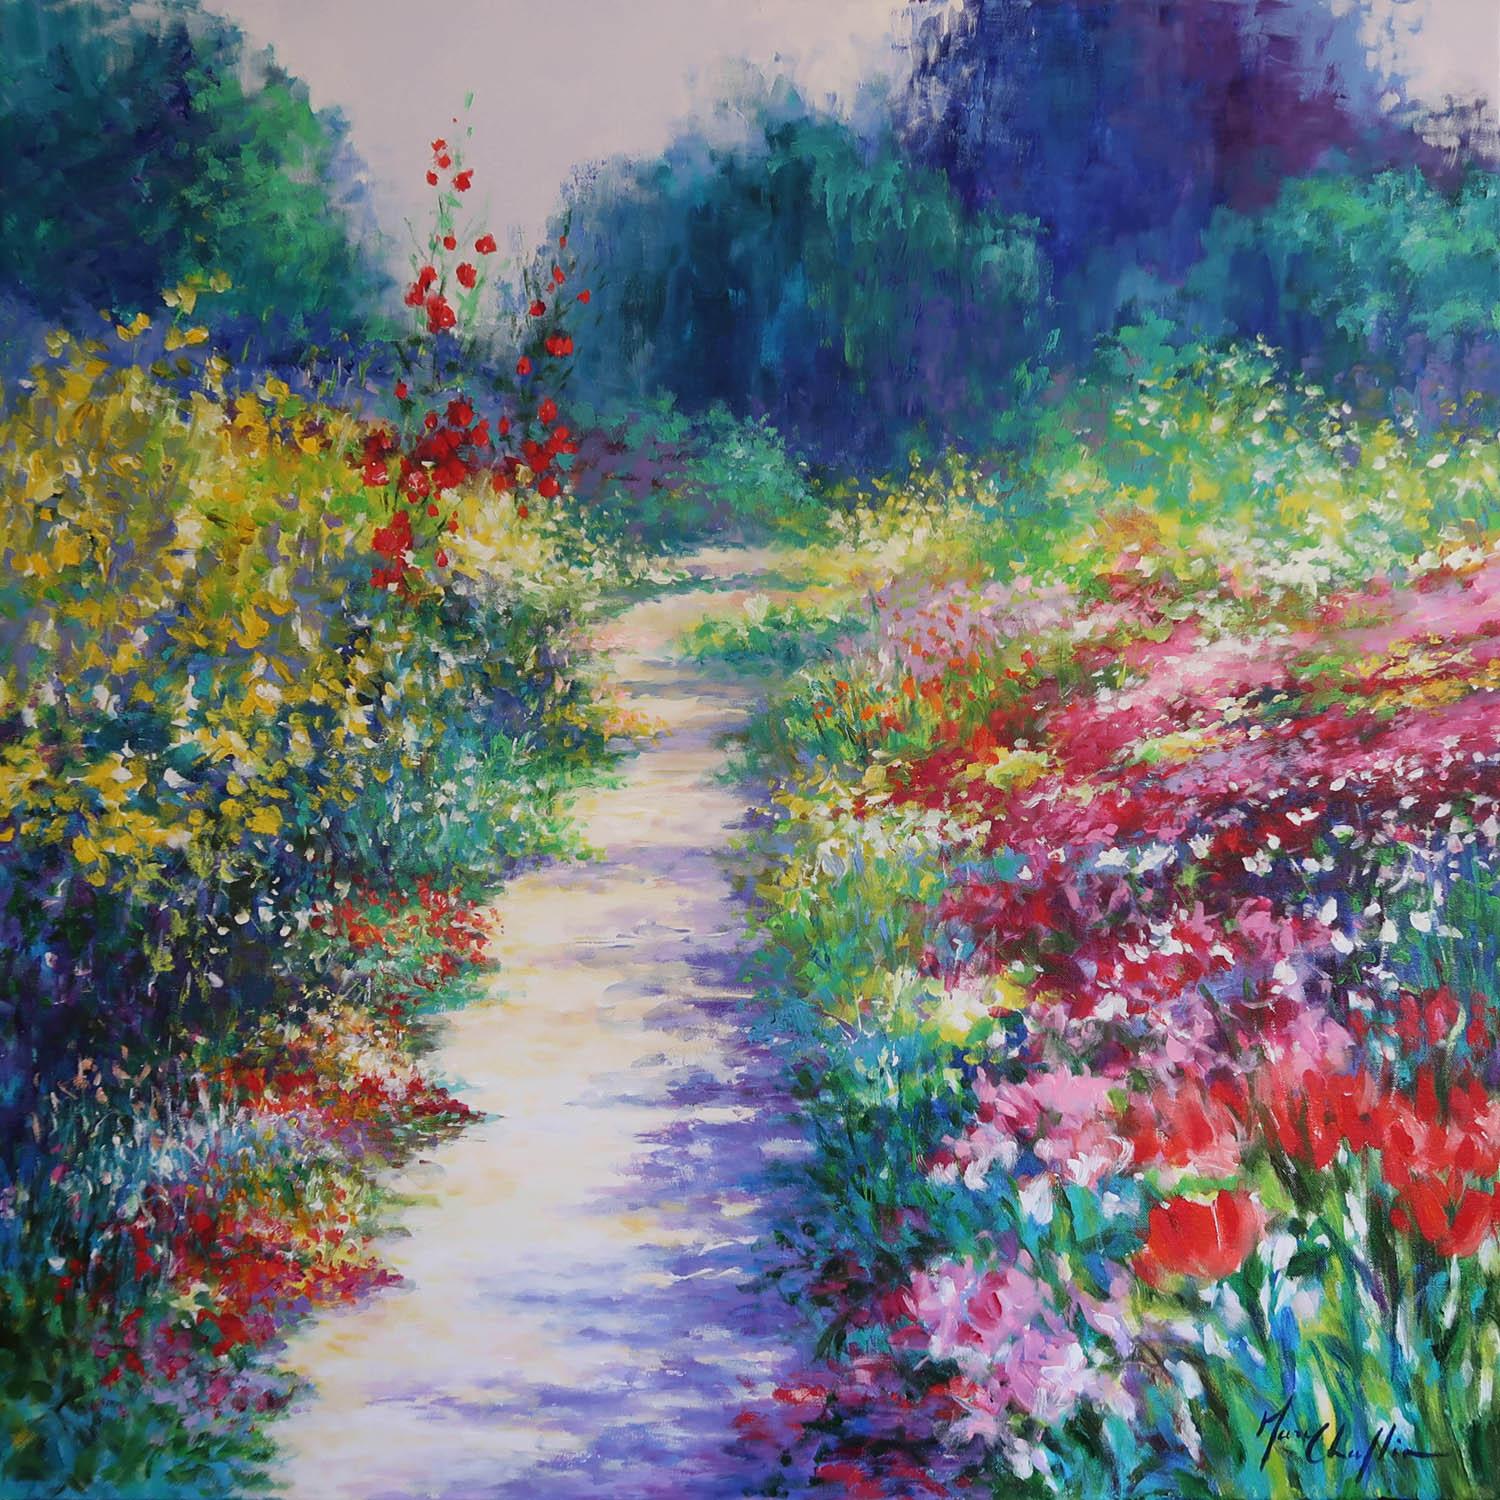 Mary Chaplin A Sunny Path At Monet S, Monet Painting Garden Path At Giverny